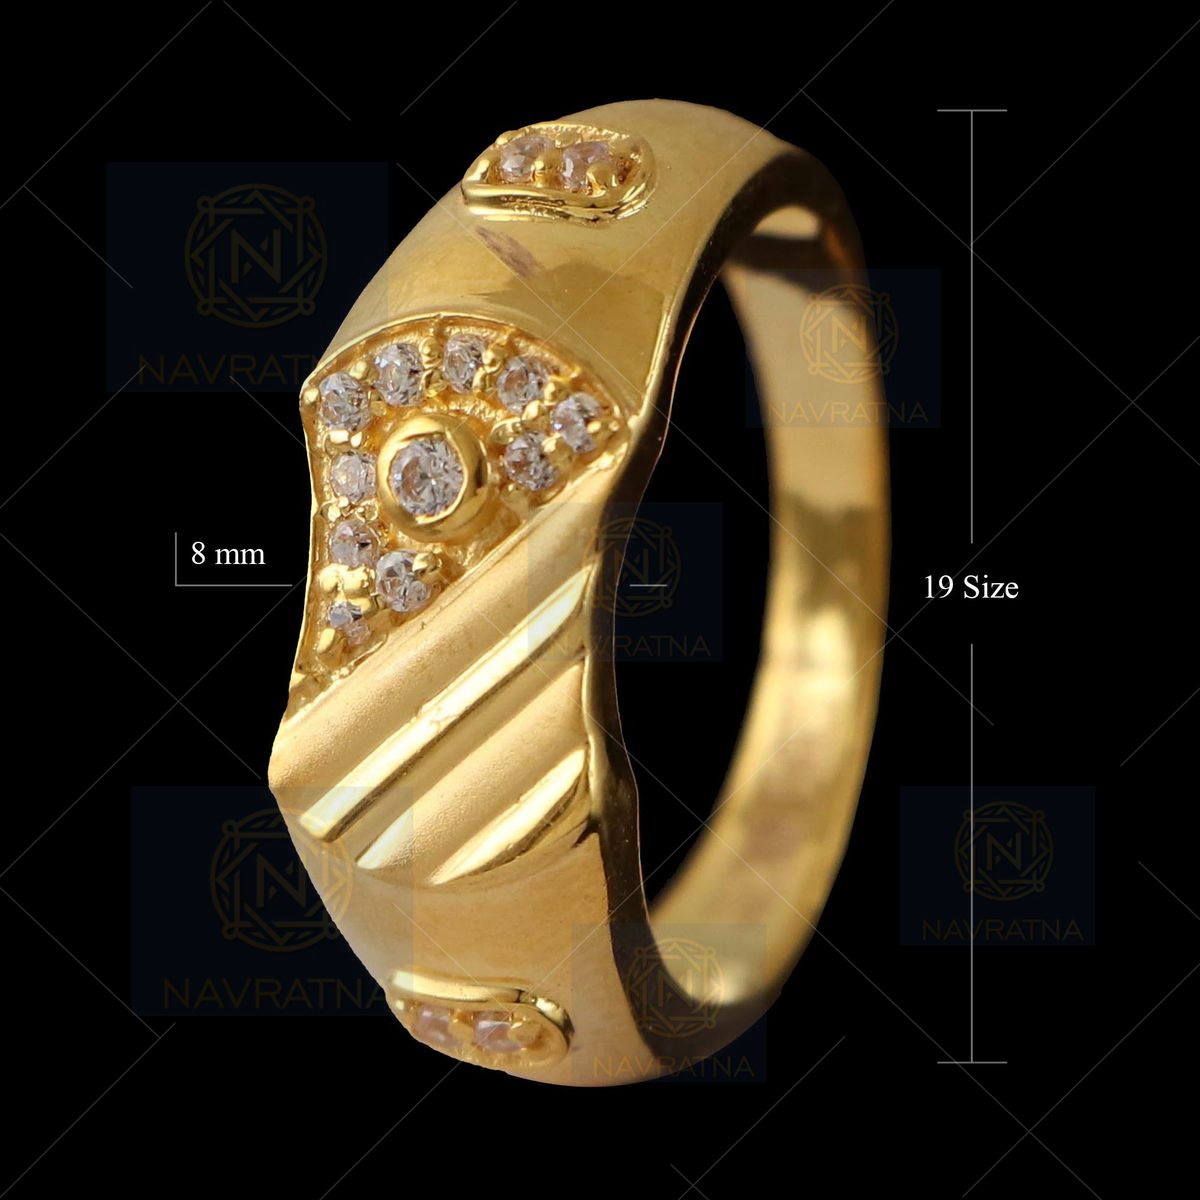 Amazon.co.jp: Solid Gold Forged Ring, Hirakomaru Honu Carved Ring, Width  0.2 inches (6 mm), 0.3 oz (8 g), Gold Ring, Engraved, Marriage, Original,  Solid Gold, Solid Gold 24 : Clothing, Shoes & Jewelry